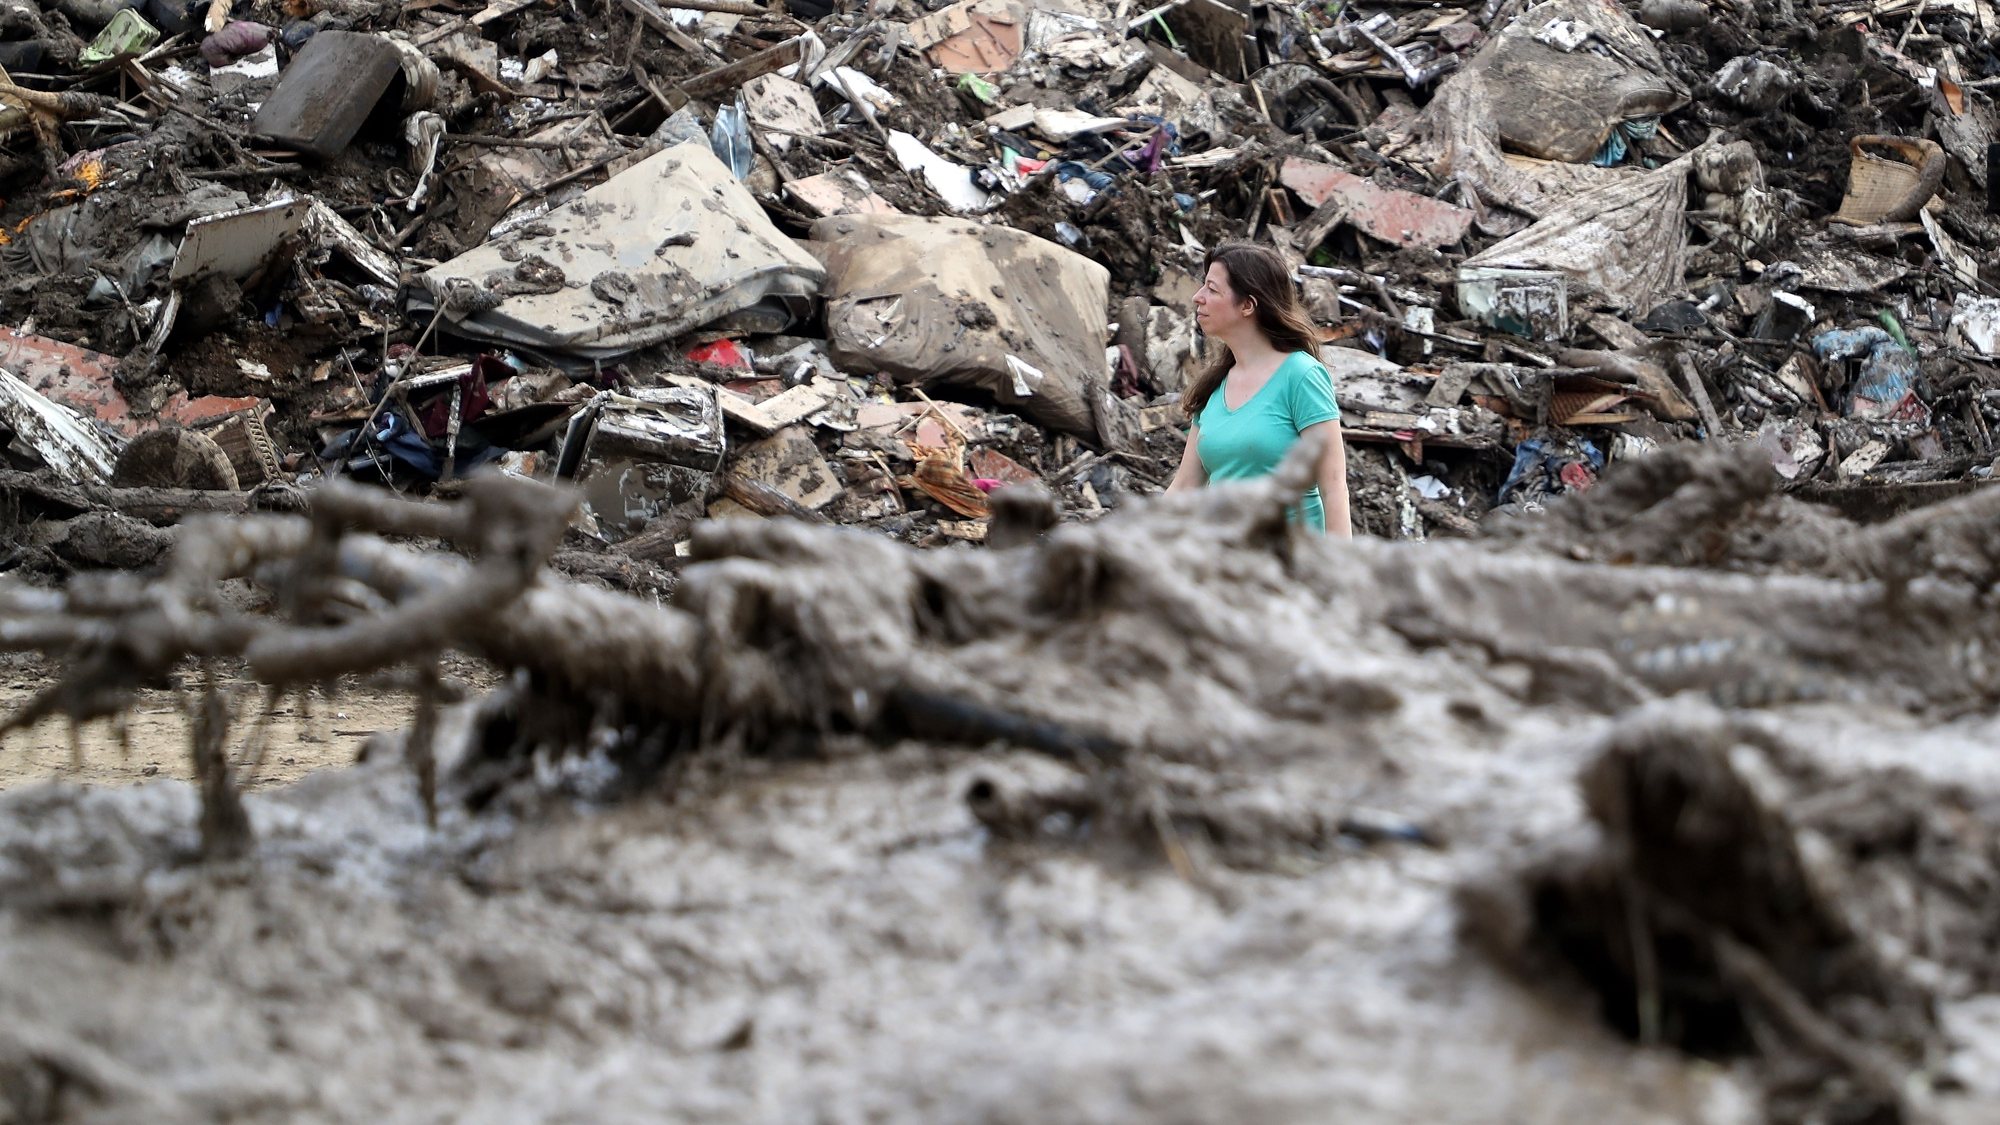 epa09353768 A person walks between the piled up rubbish after the flooding of the Ahr River, in Altenahr, Germany, 19 July 2021. Large parts of western Germany and central Europe were hit by flash floods in the night of 14 to 15 July, following days of continuous rain that destroyed buildings and swept away cars. The total number of victims in the flood disaster in western Germany rises to at least 164, with many hundreds still missing.  EPA/FRIEDEMANN VOGEL